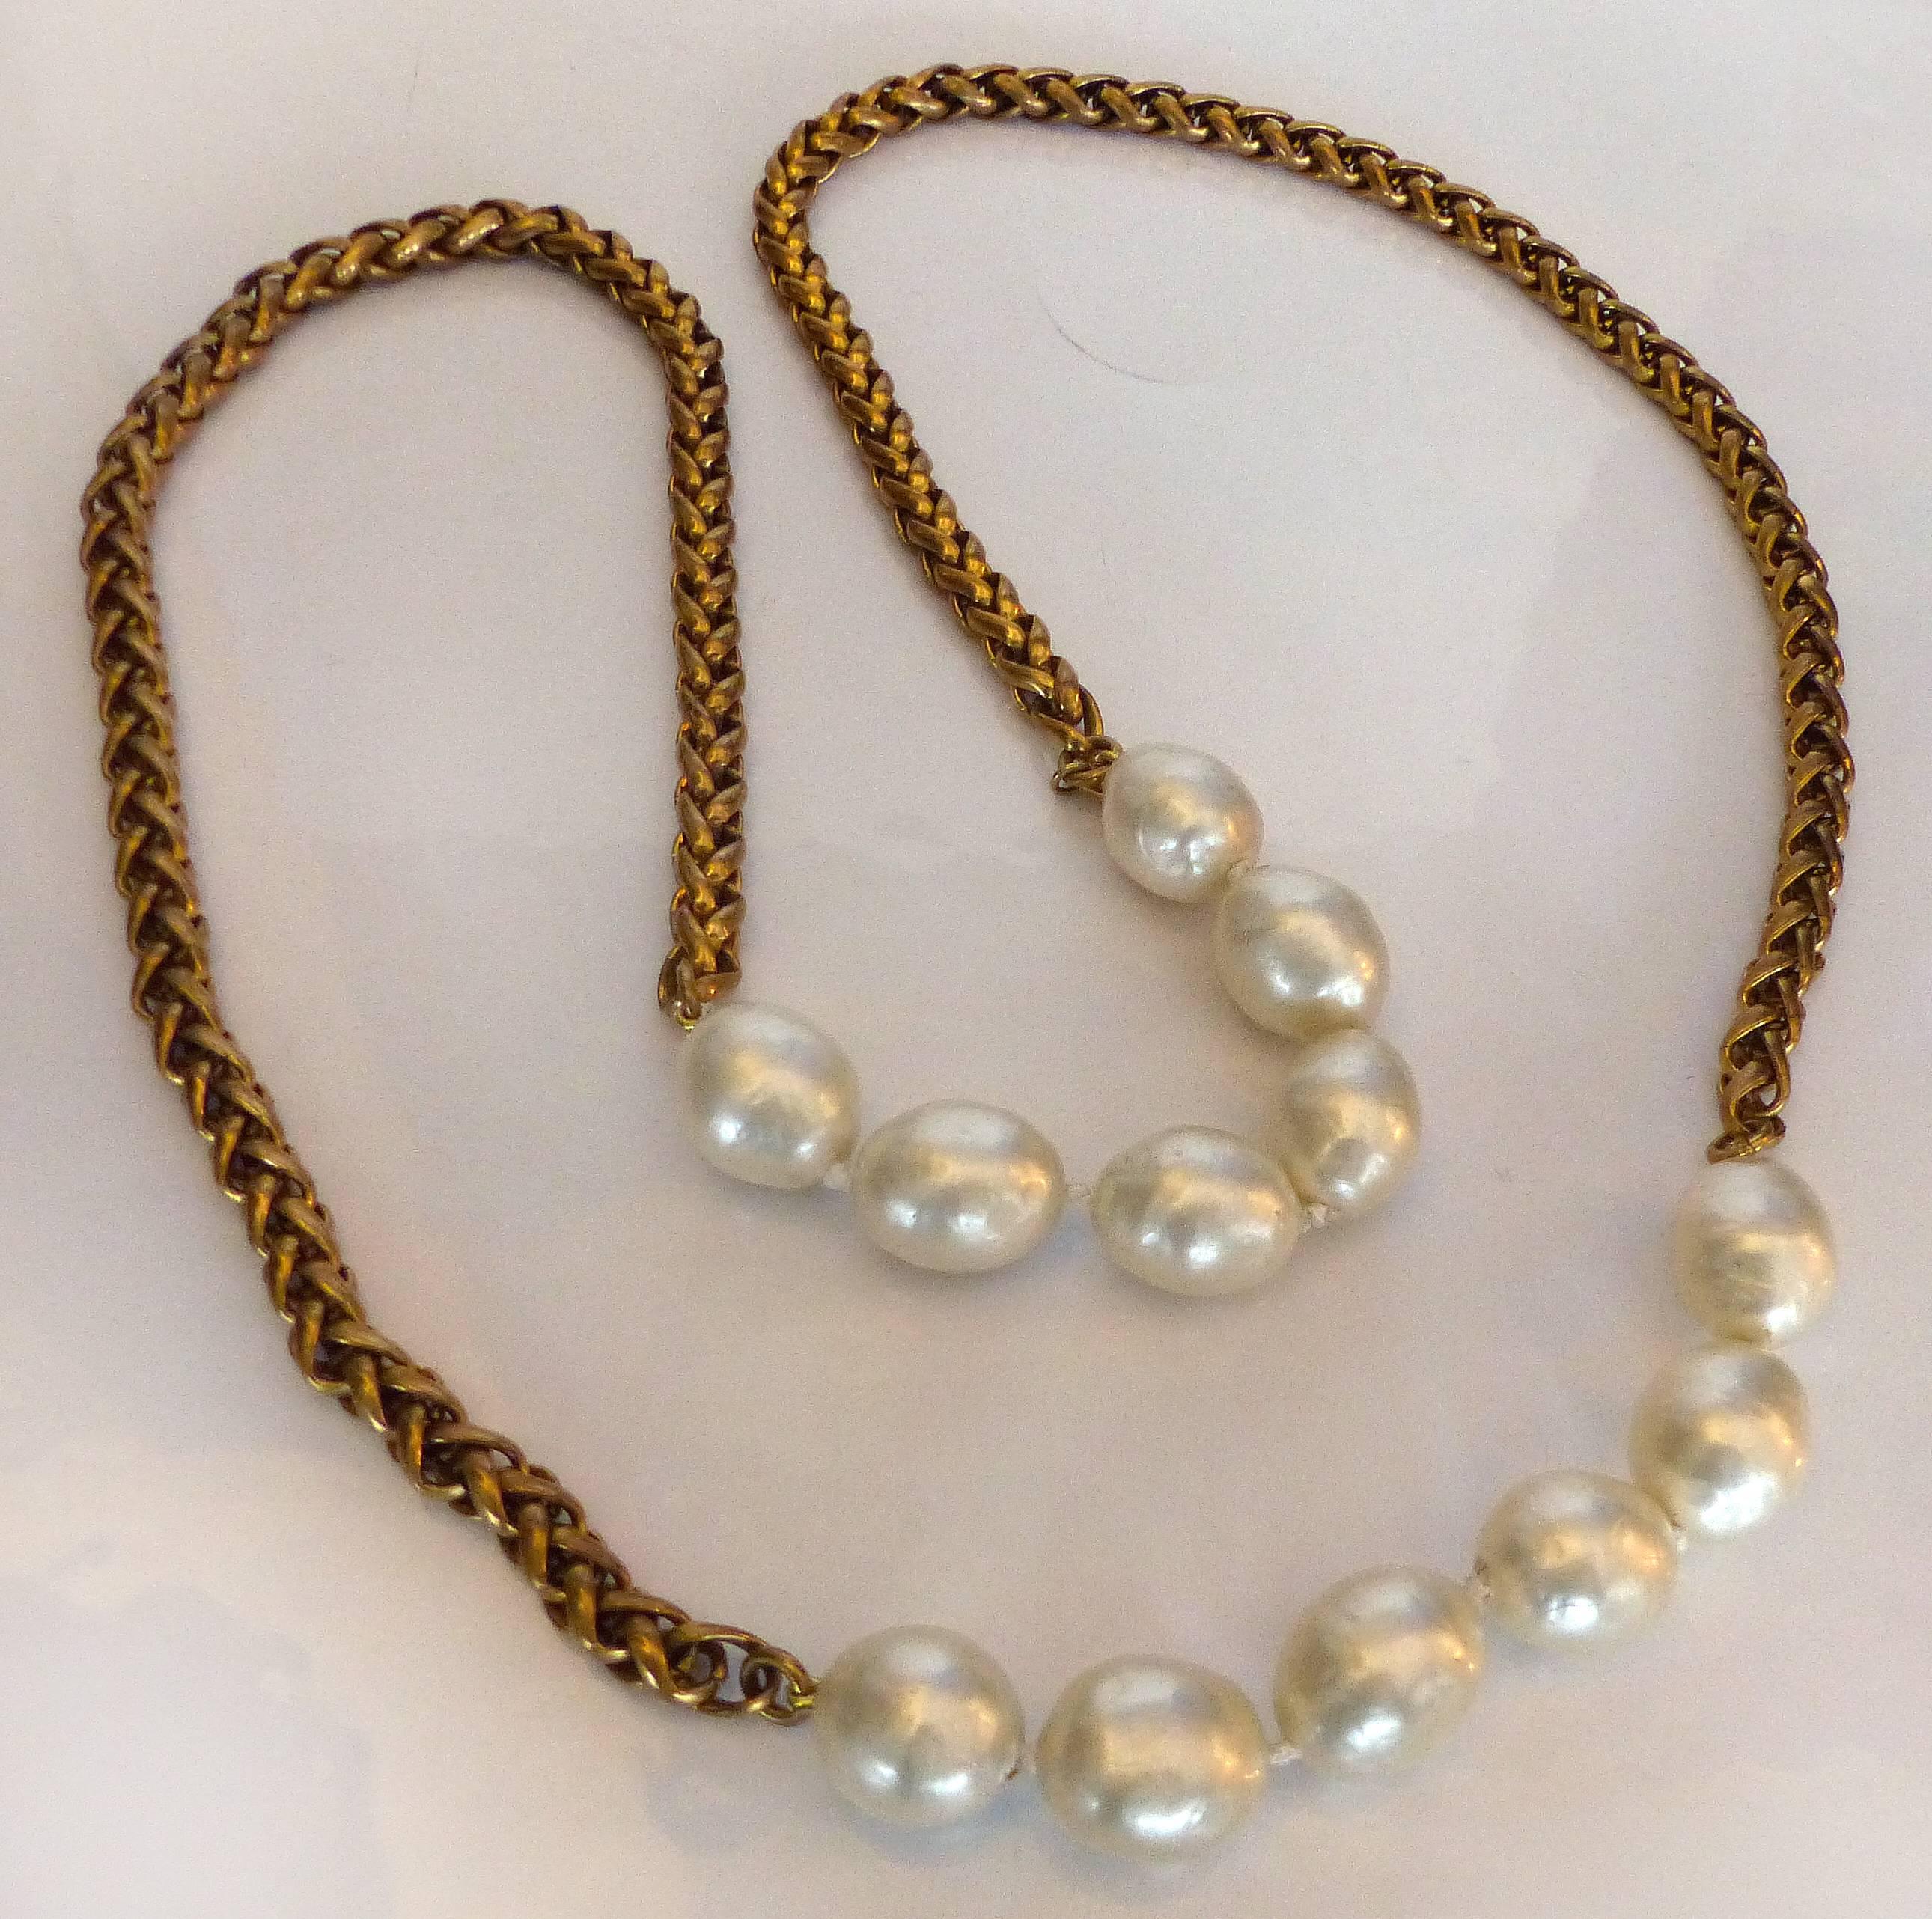 Late 20th Century Vintage Chanel Gold-Tone Necklace with Faux Pearls, 1984